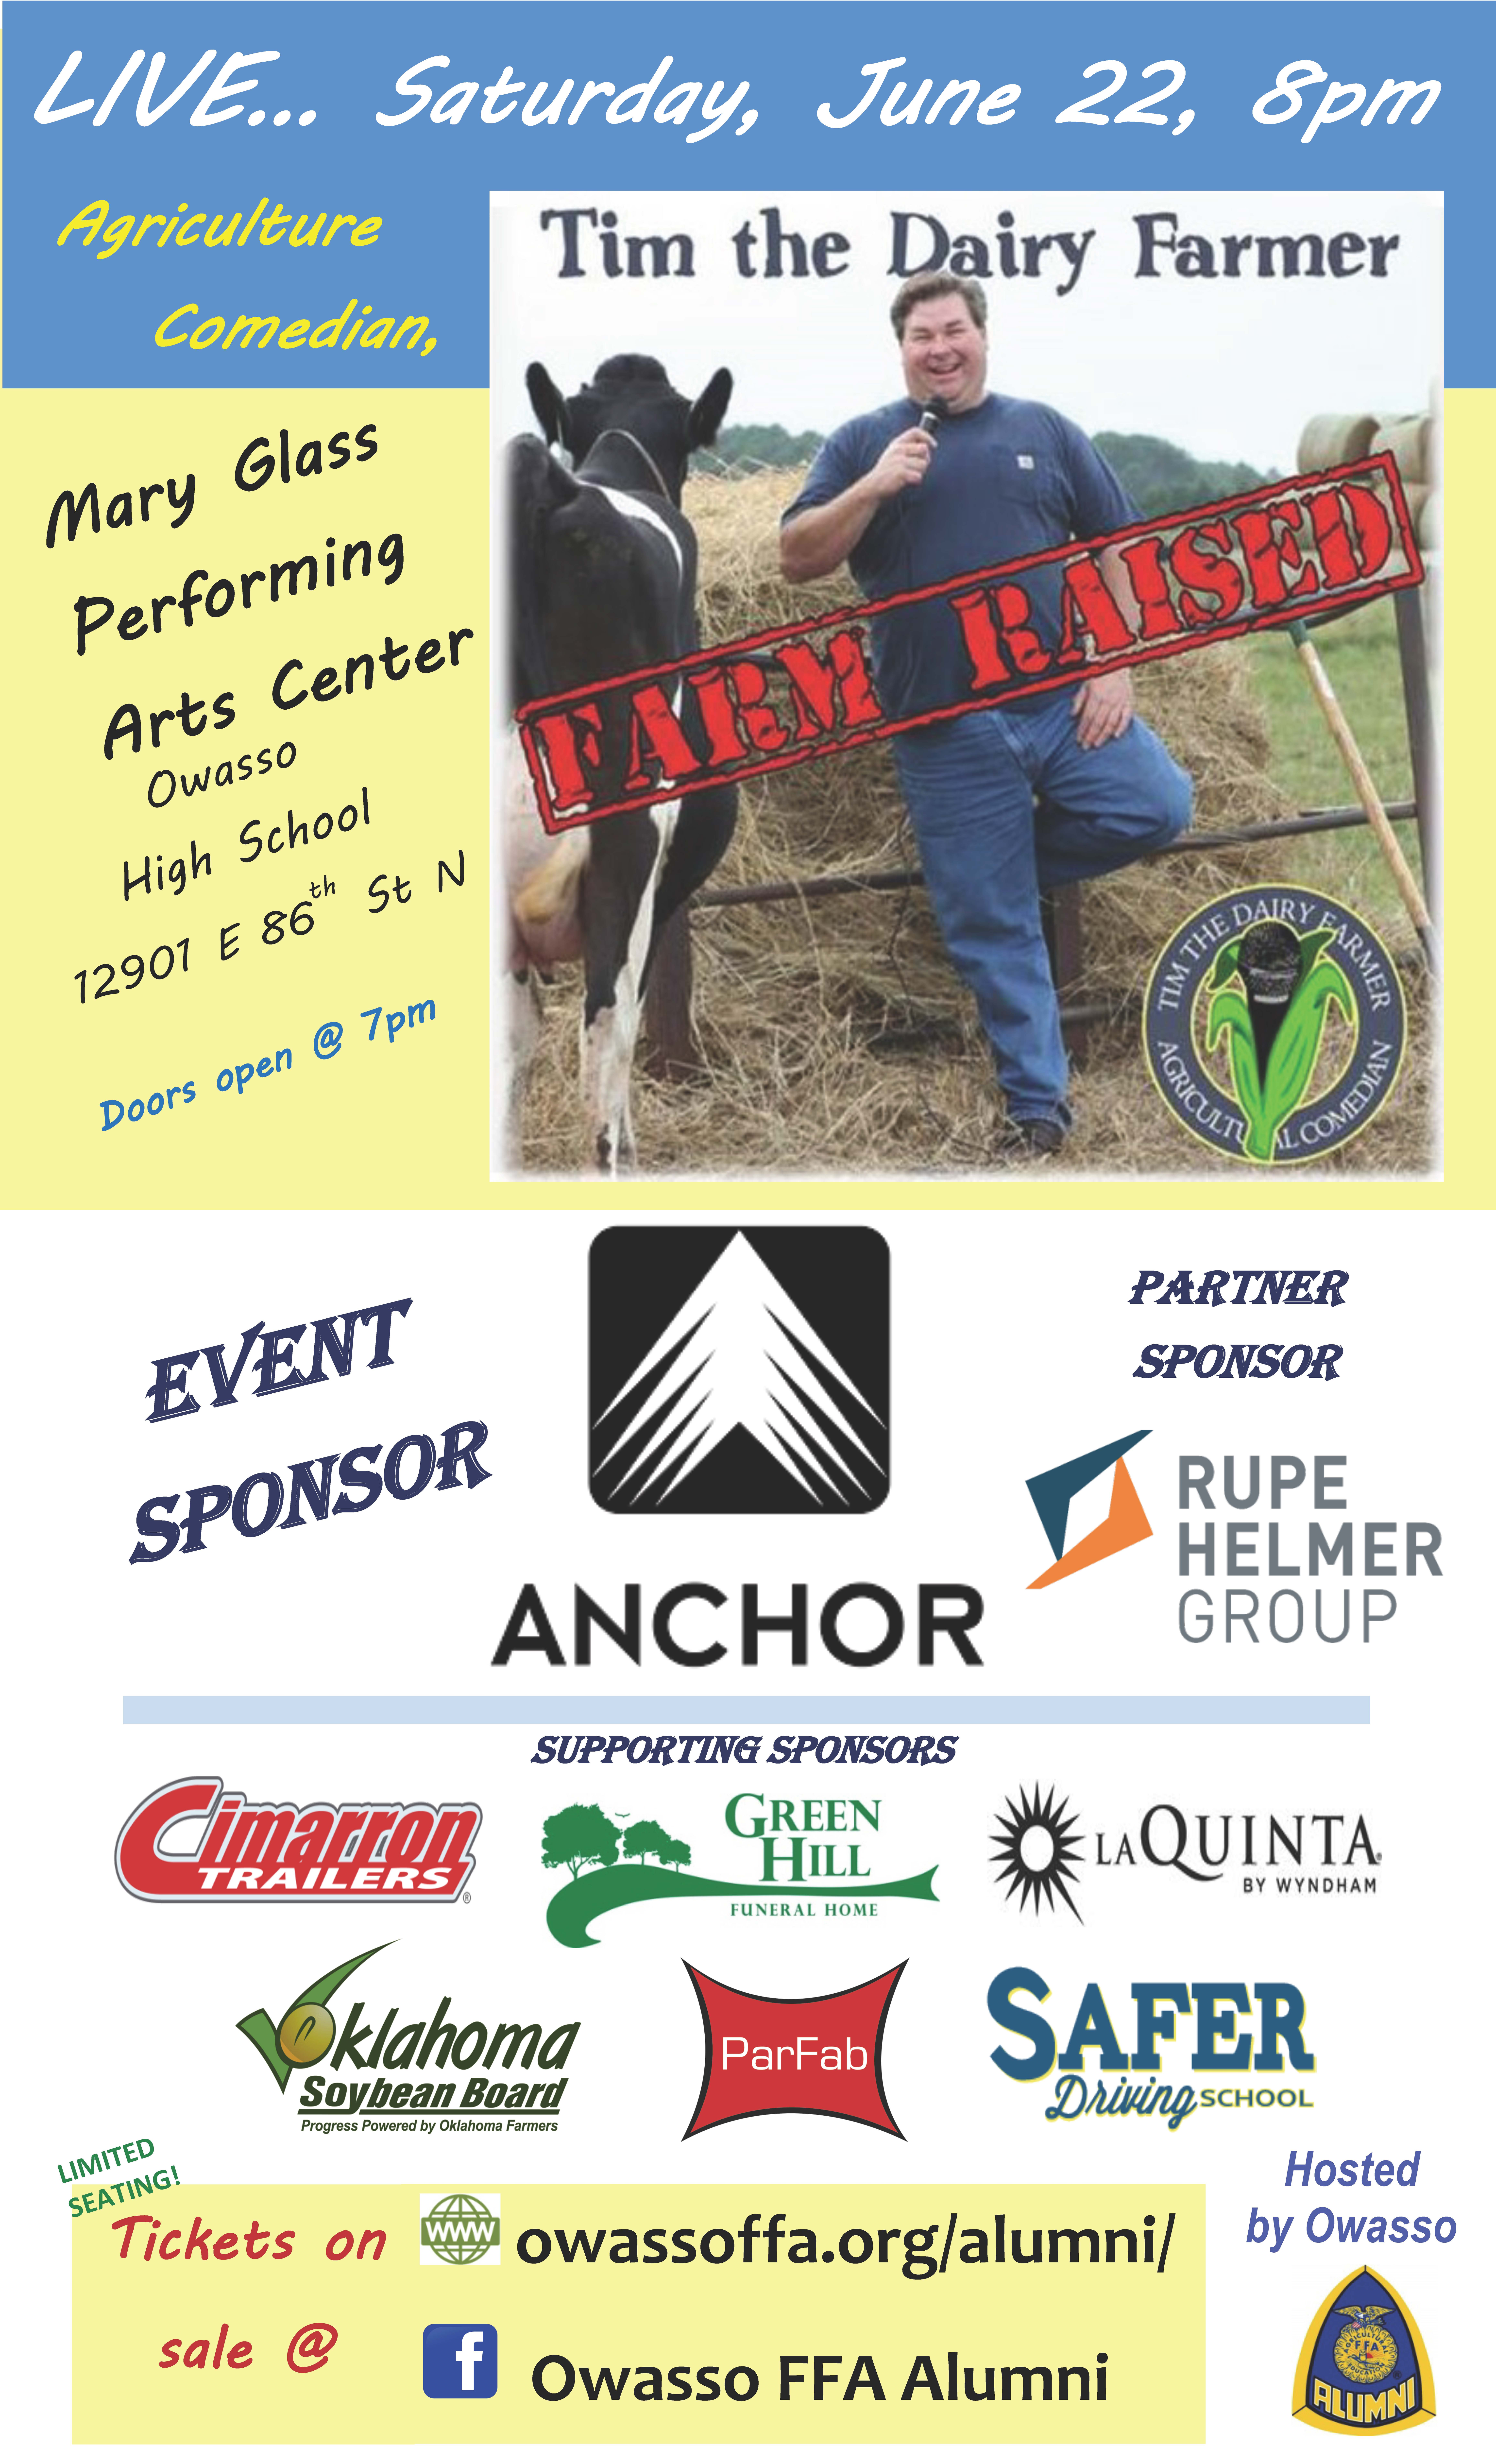 Tim the Dairy Farmer to Perform in Owasso, Oklahoma, Saturday, June 22nd